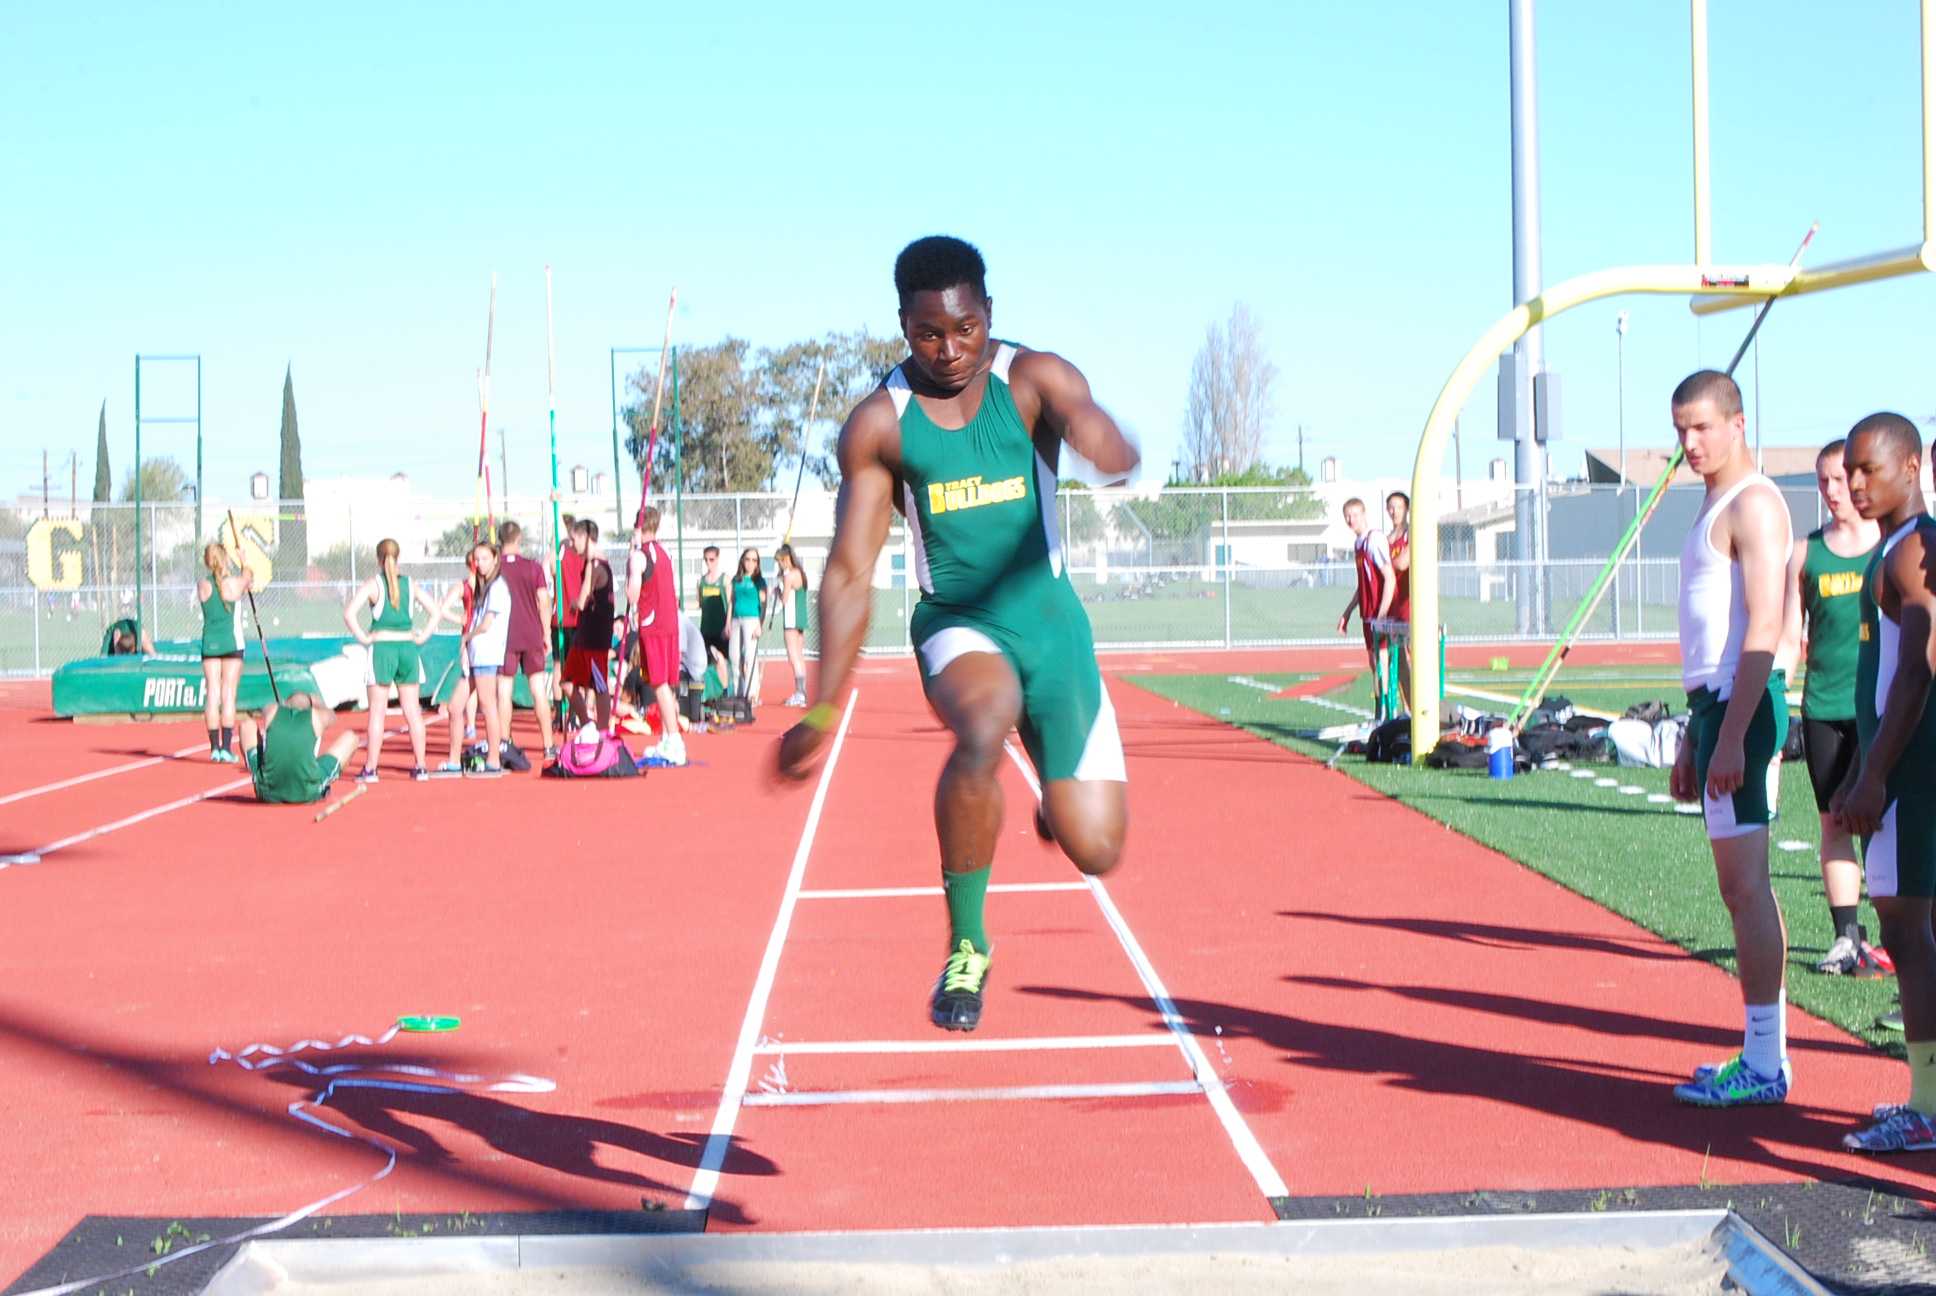 Senior+George+Obinna+takes+off+for+a+jump+in+a+long+jump+event+against+Liberty+High+School+at+Tracy+High+School+on+March+13.